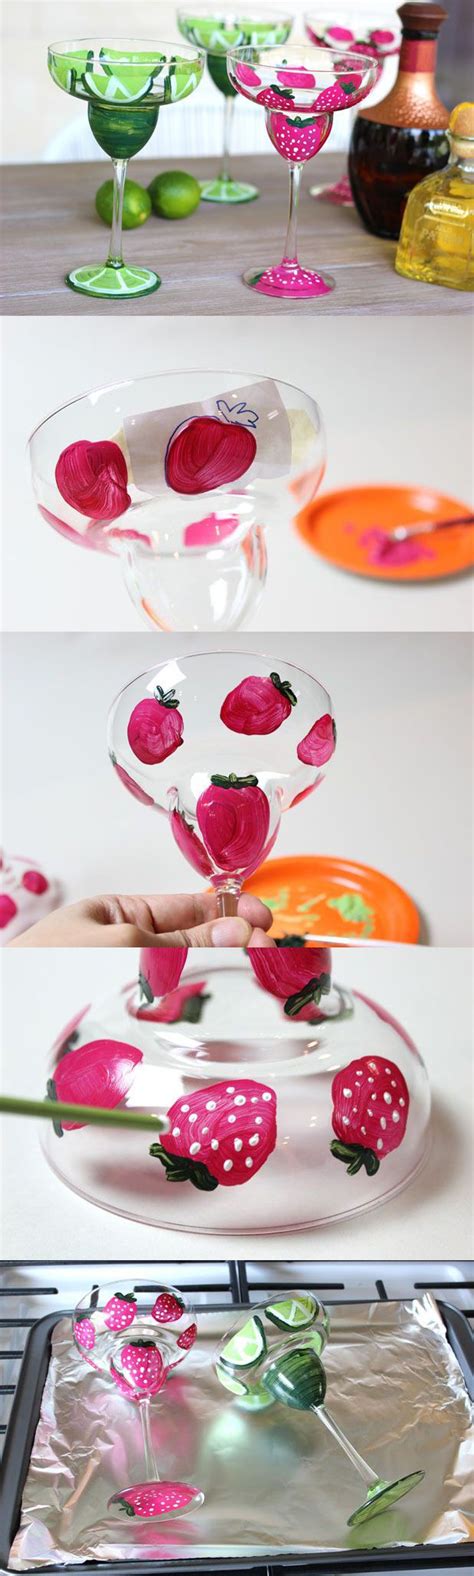 Diy Hand Painted Margarita Glasses Ehow Wine Glass Crafts Diy Wine Glass Decorated Wine